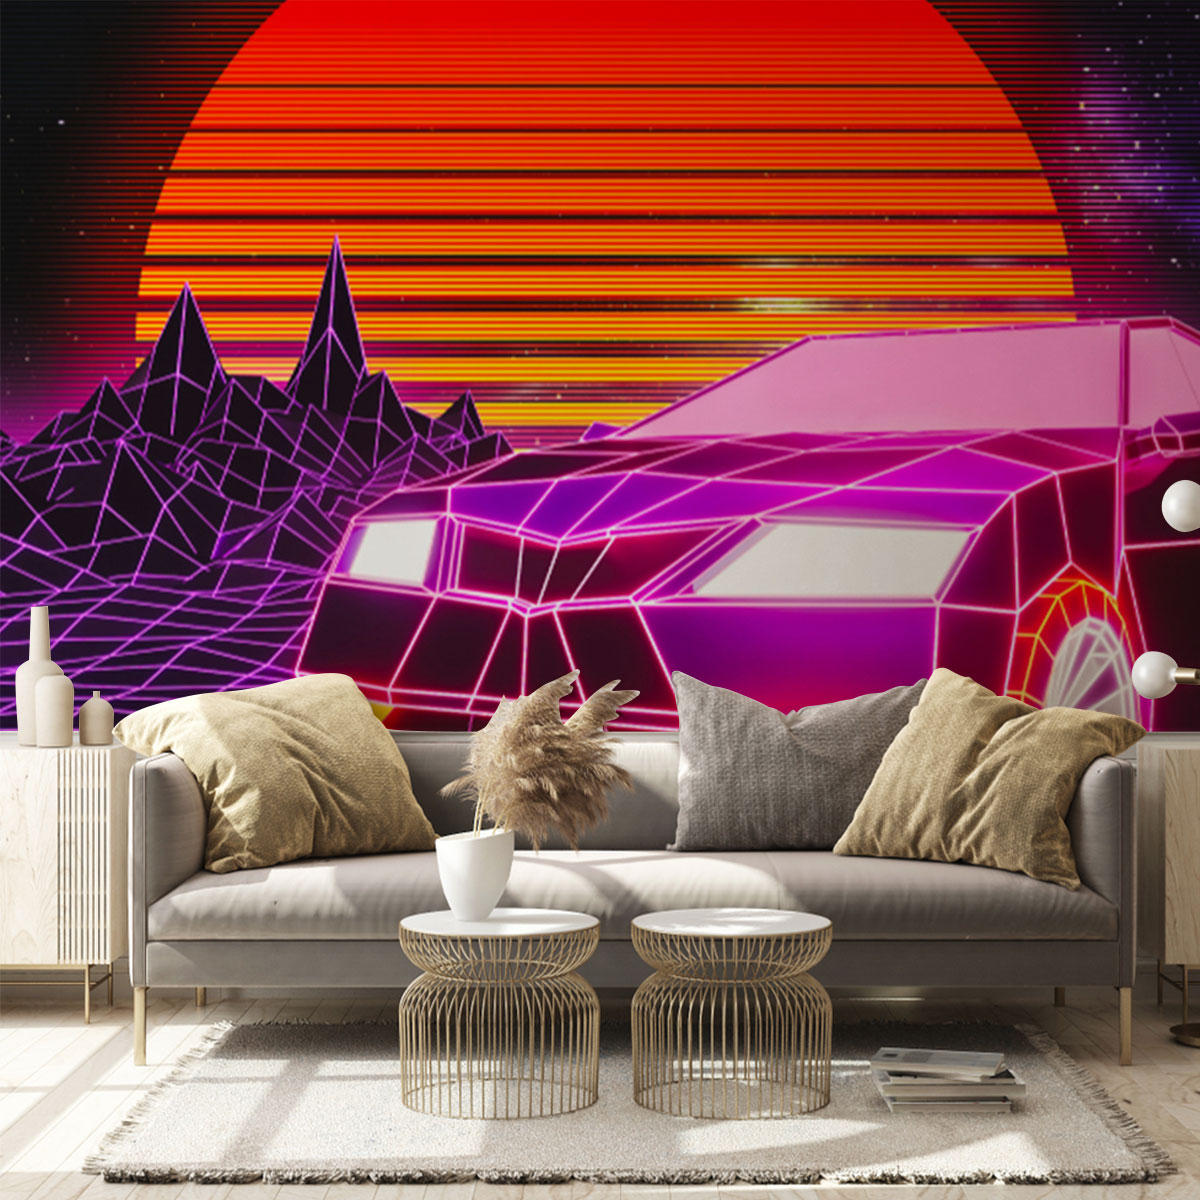 Retro Car In The Sunset Wall Mural